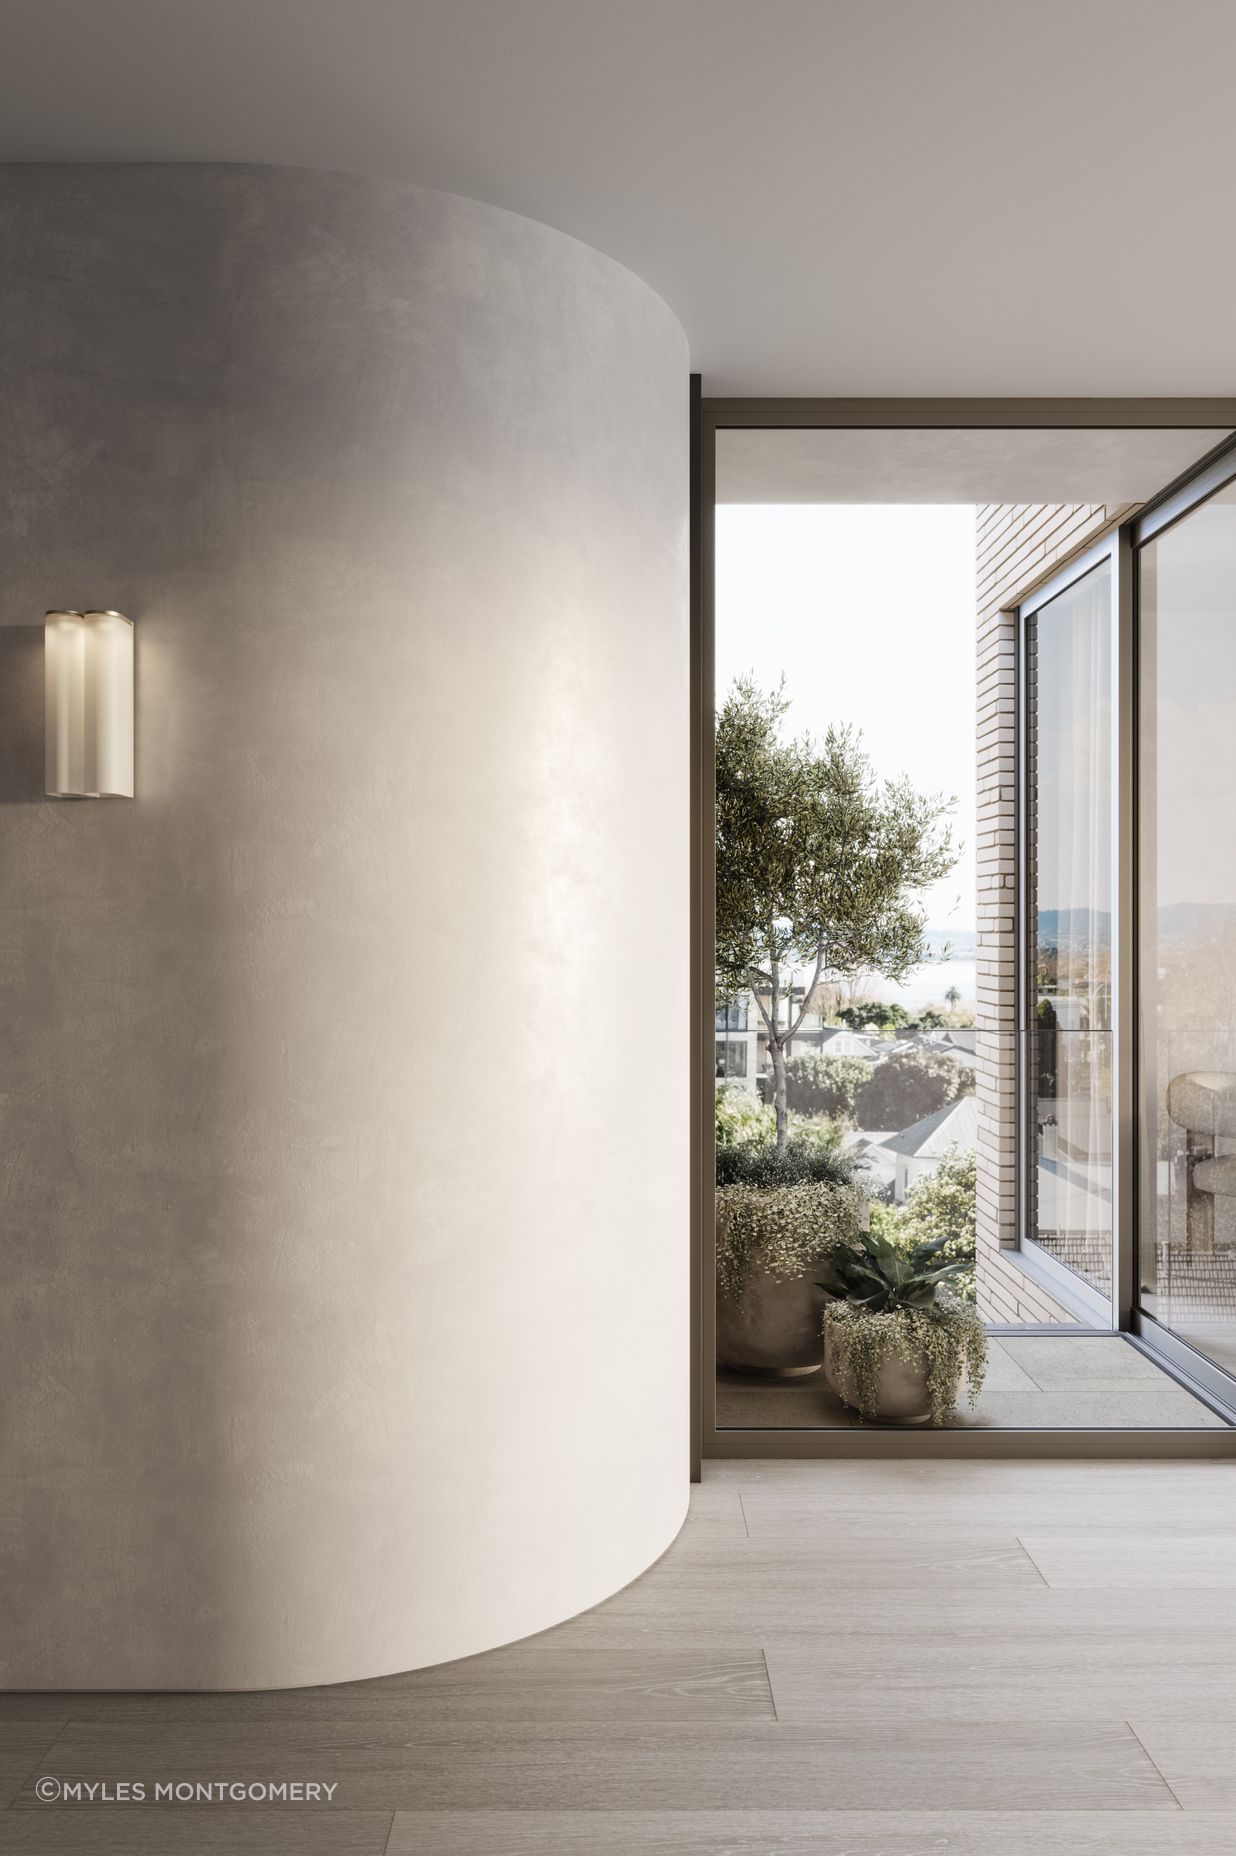 Soft curves grace the walls. Wintergardens, positioned at the center of each floor, demarcate spaces and amplify light.